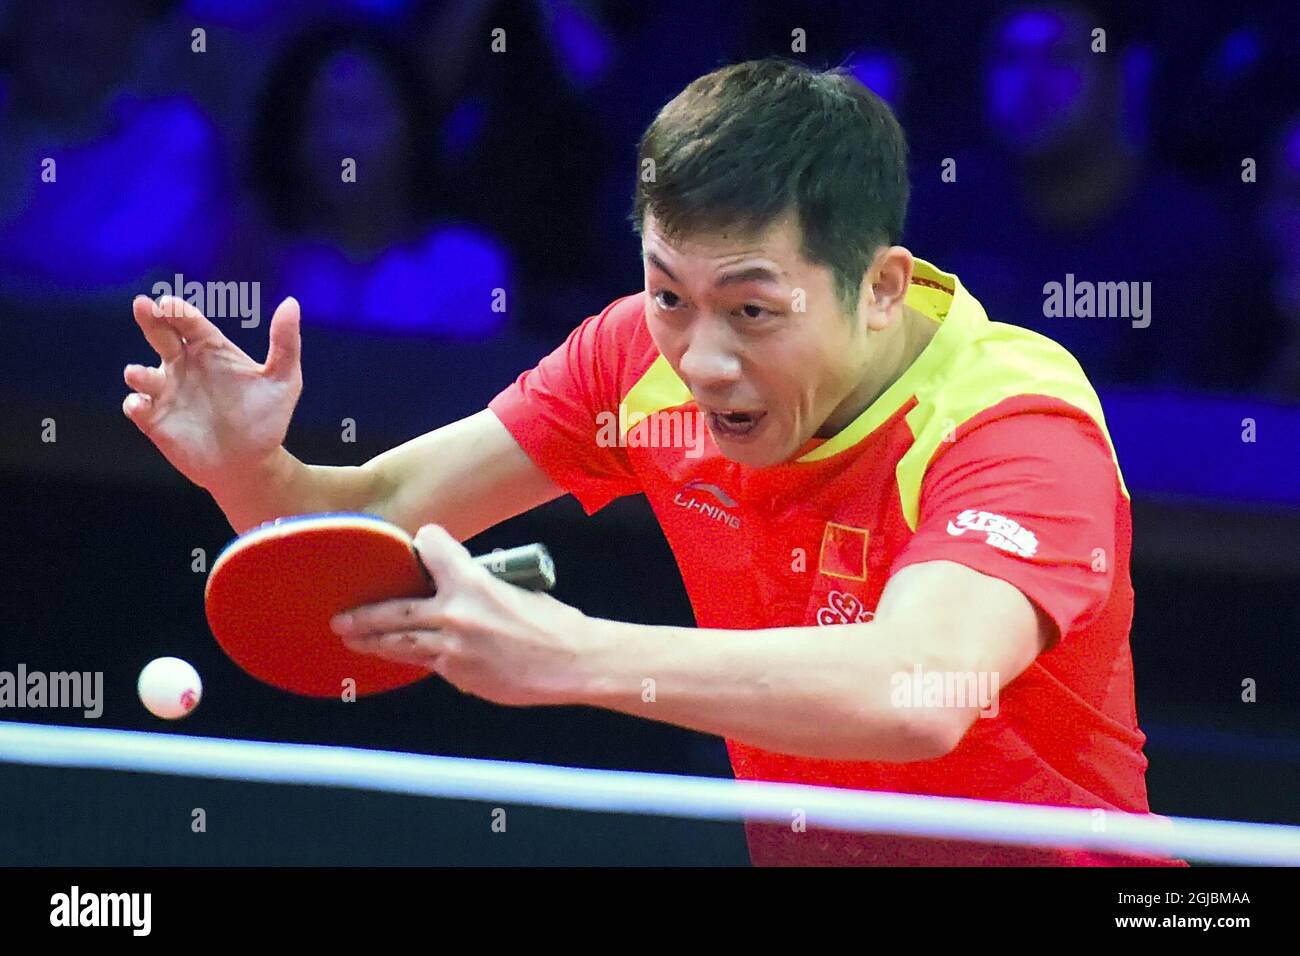 Xu Xin of China in action against compatriot Fan Zhendong during the men's single final table tennis match at the Swedish Open Championships in Eriksdalshallen in Stockholm, Sweden, on Nov. 04, 2018. Photo: Hanna Franzén / TT / kod 11870  Stock Photo